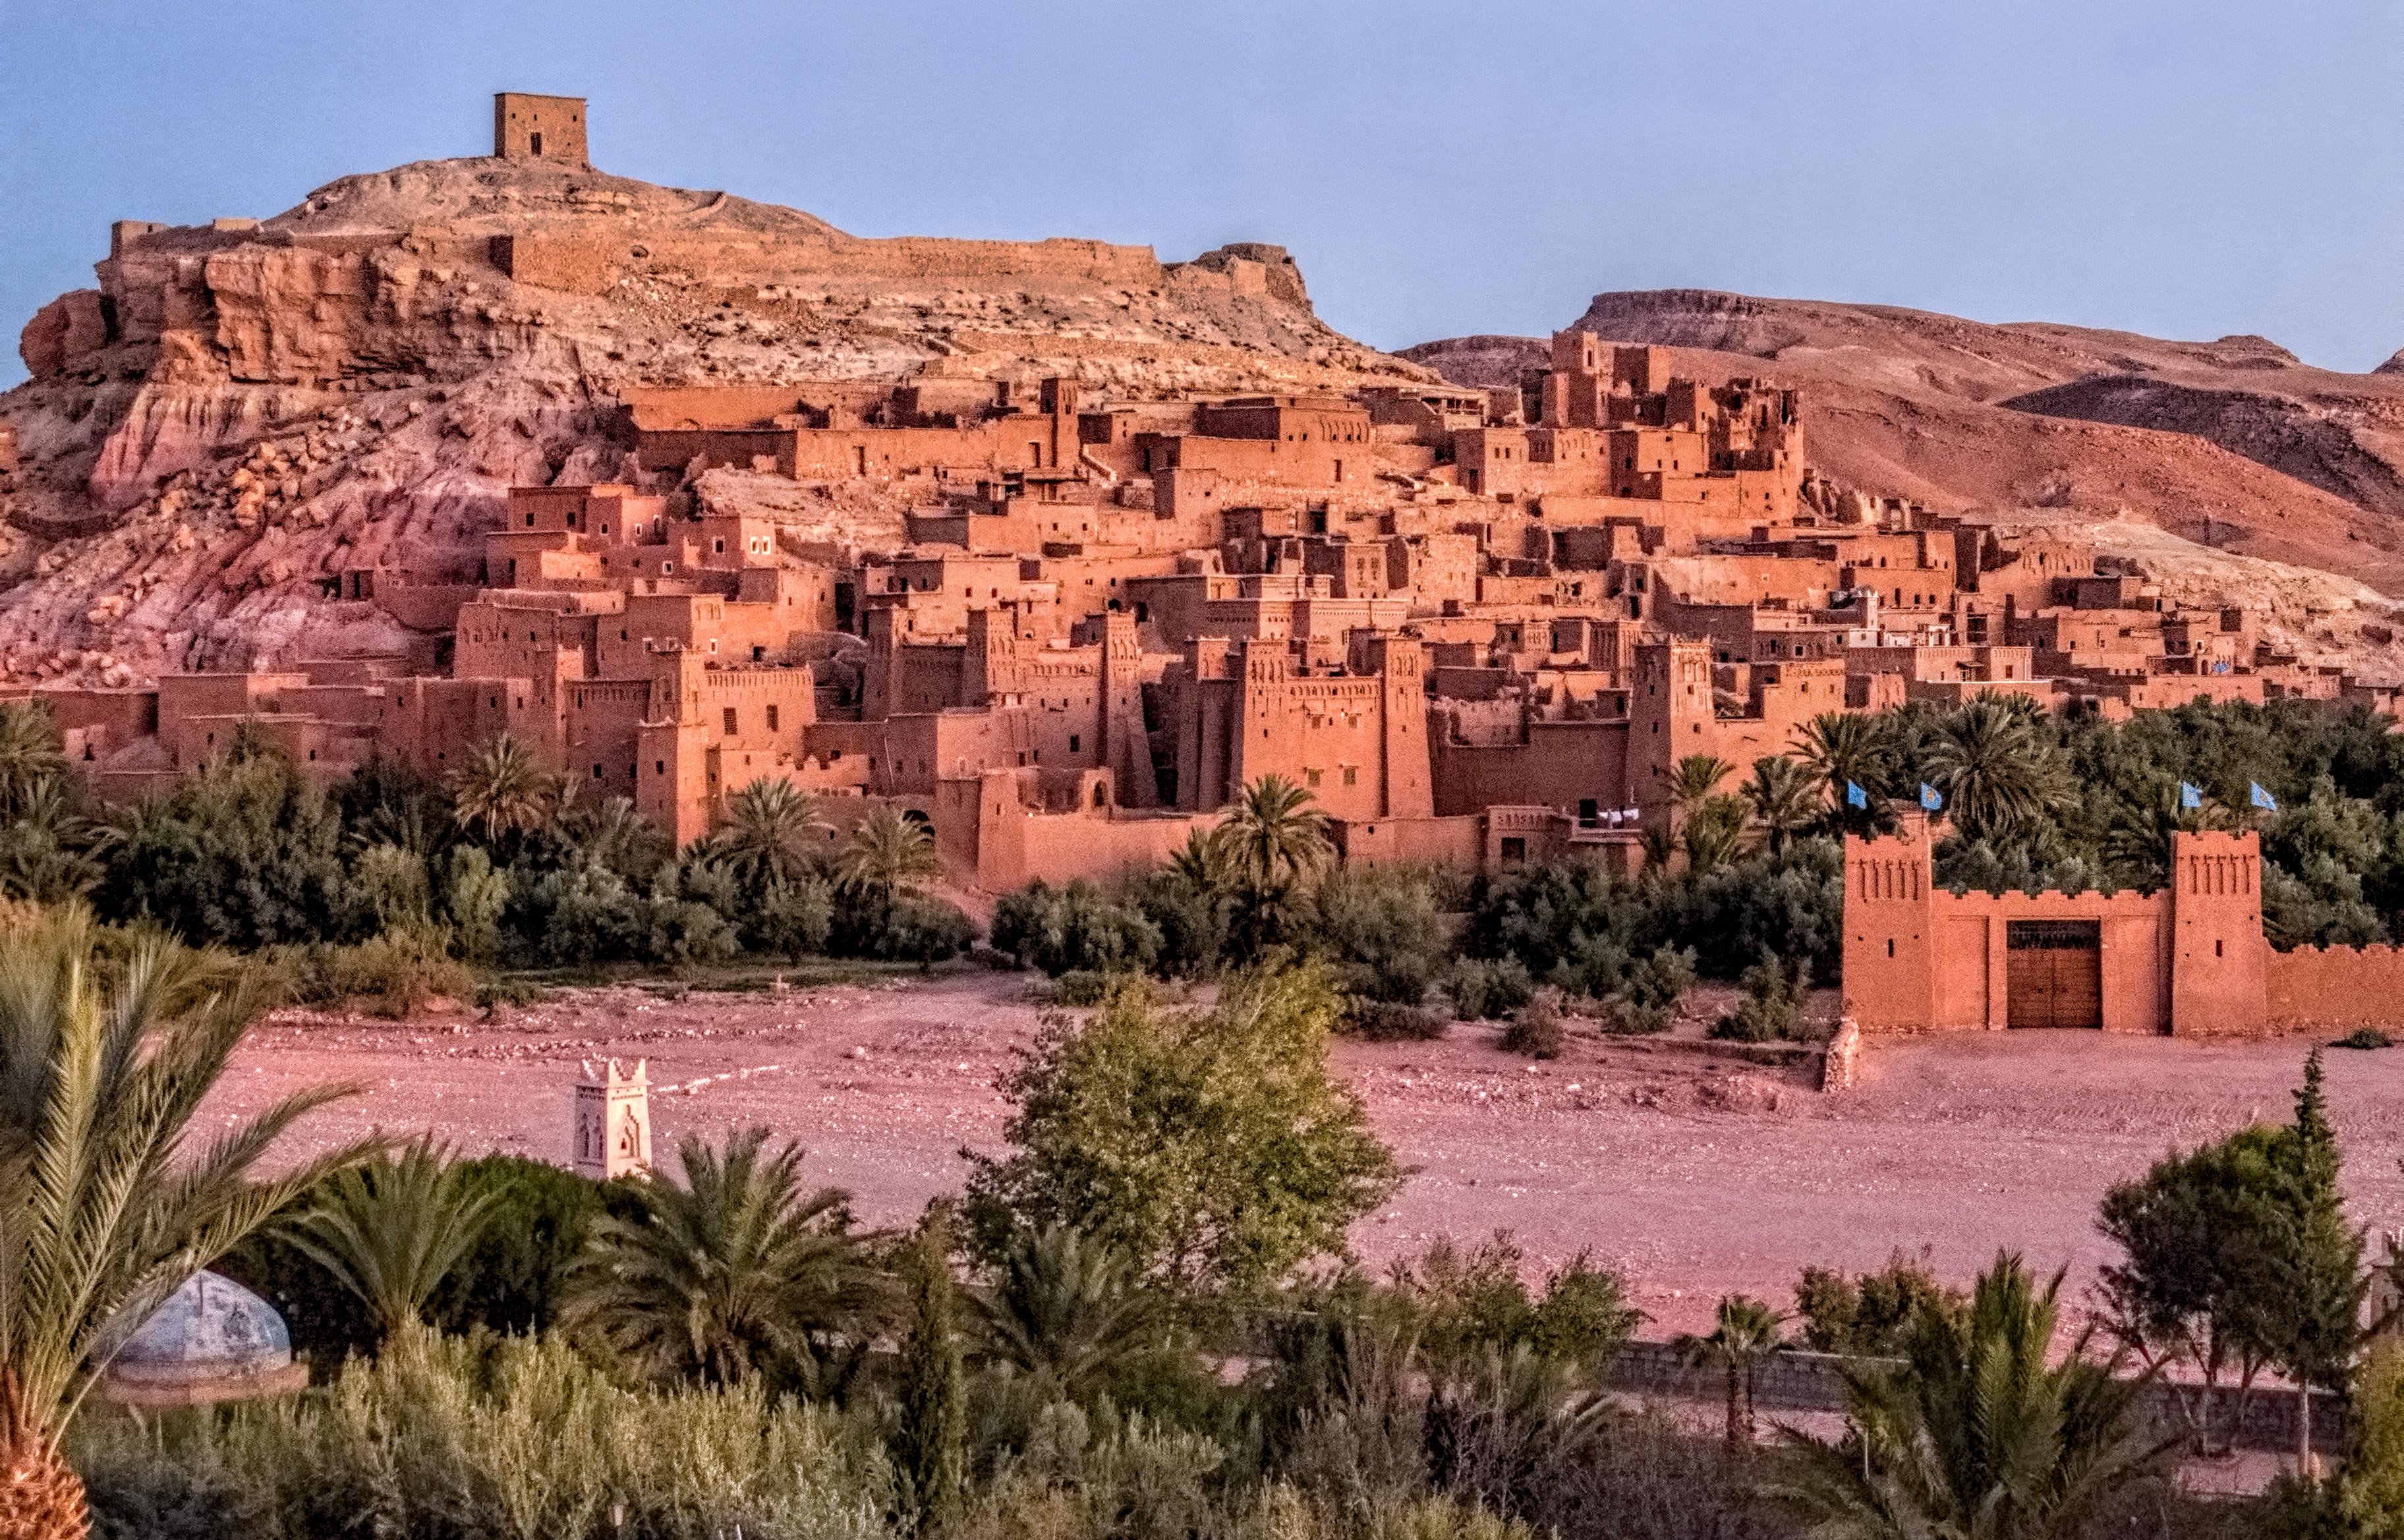 Aït Ben Haddou, the fortified city in the foothills of the High Atlas in Morocco